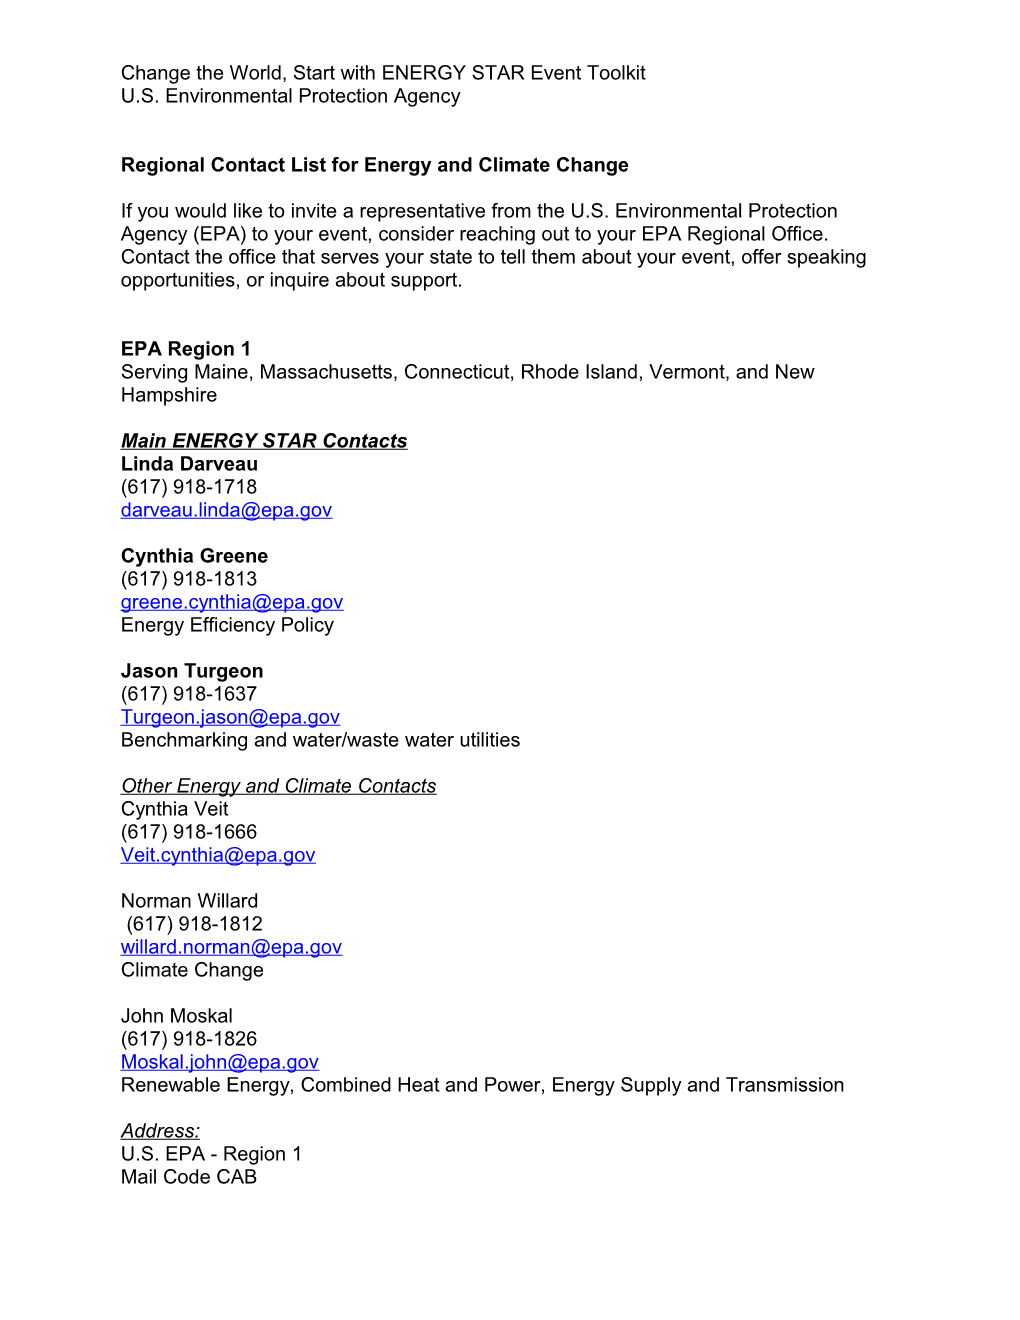 Regional Contact List for Energy and Climate Change